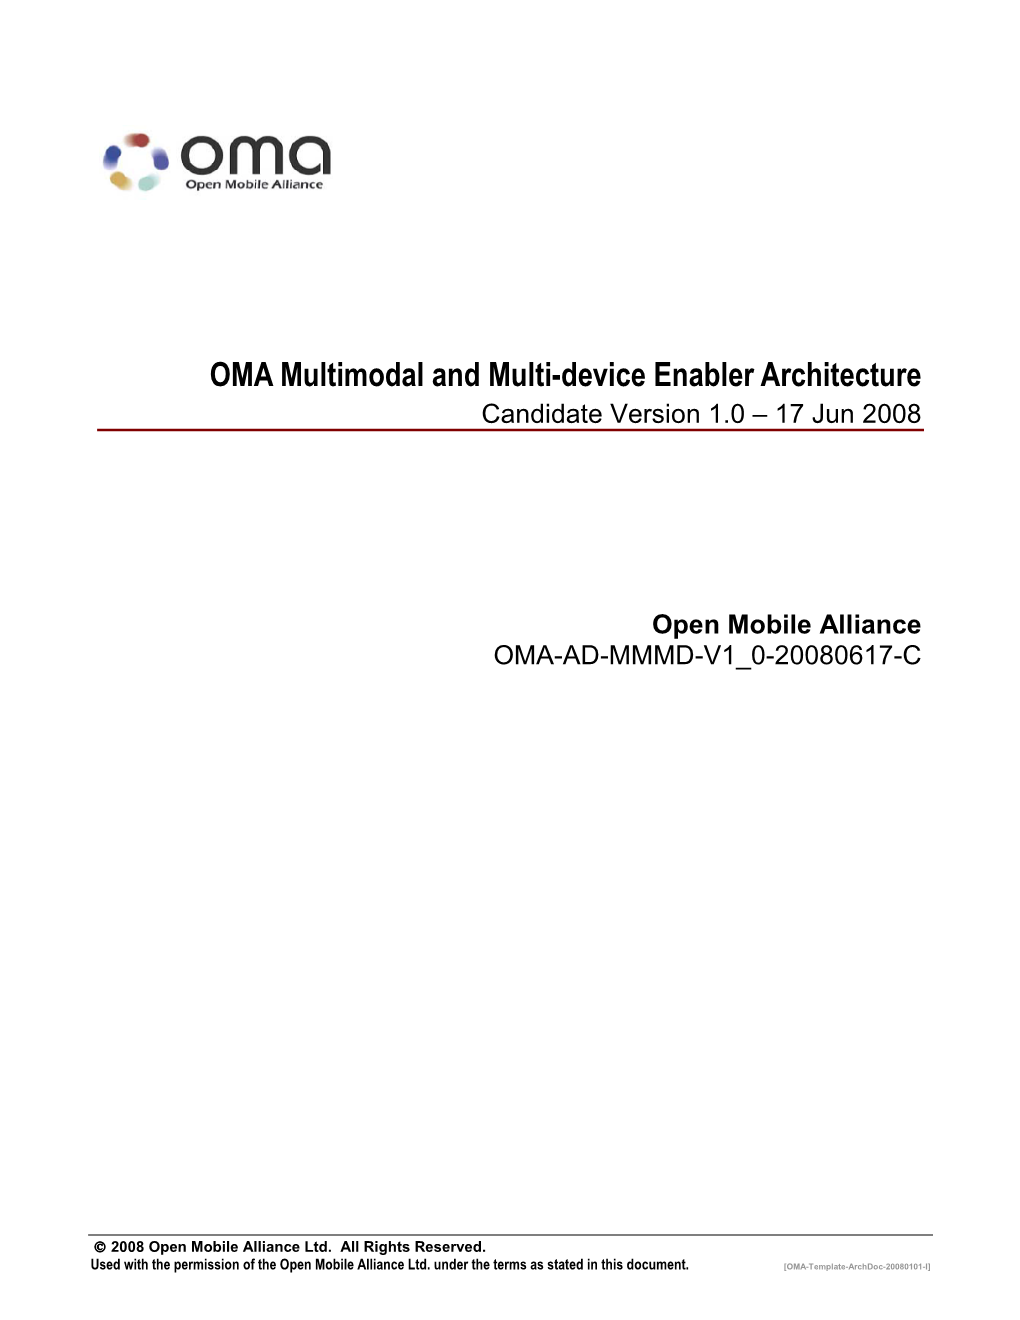 OMA Multimodal and Multi-Device Enabler Architecture Candidate Version 1.0 – 17 Jun 2008